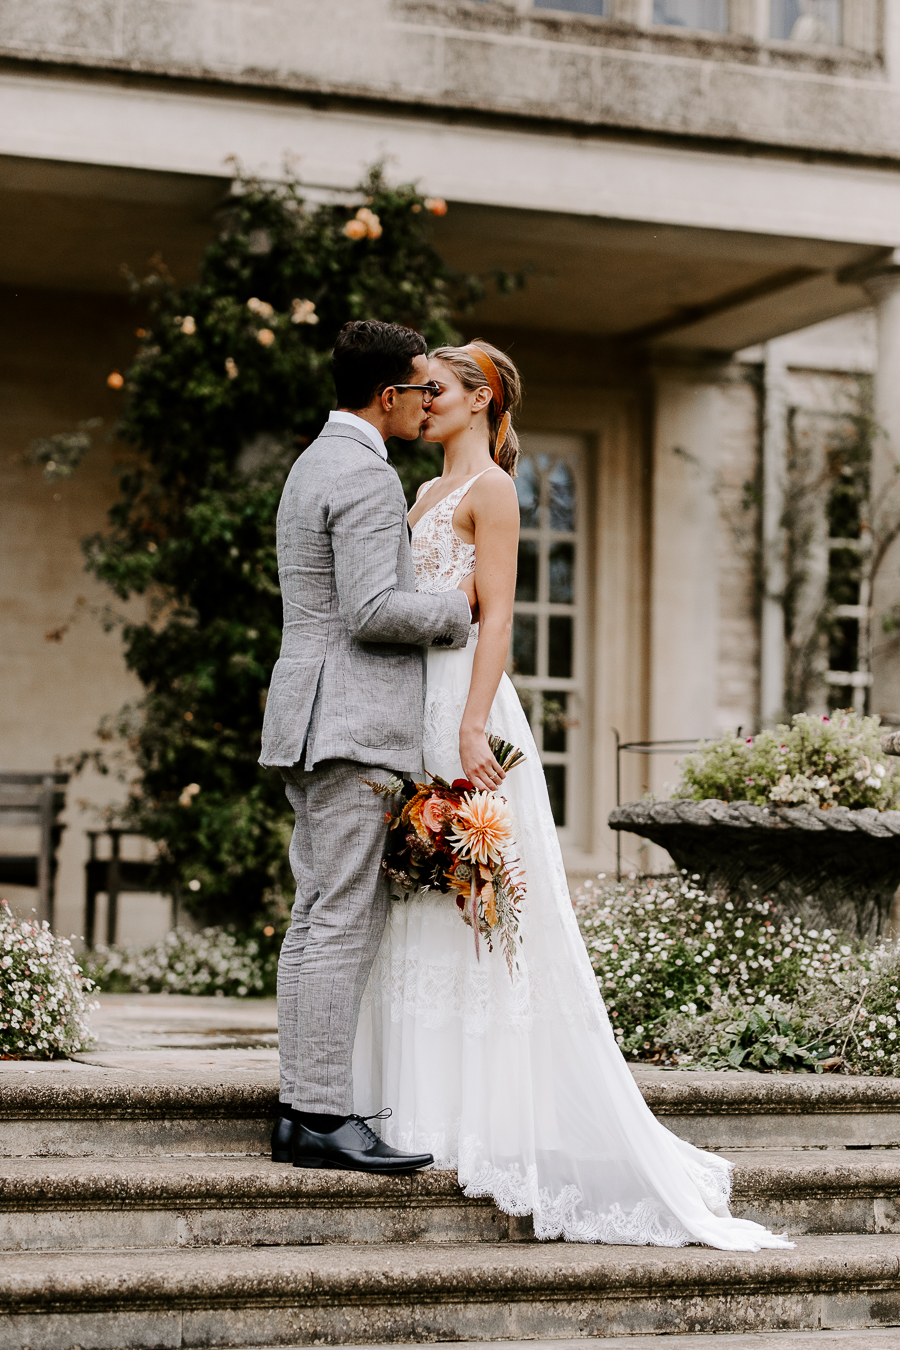 A magical wiltshire wedding venue - the Lost Orangery with Sam Cook Photography (15)